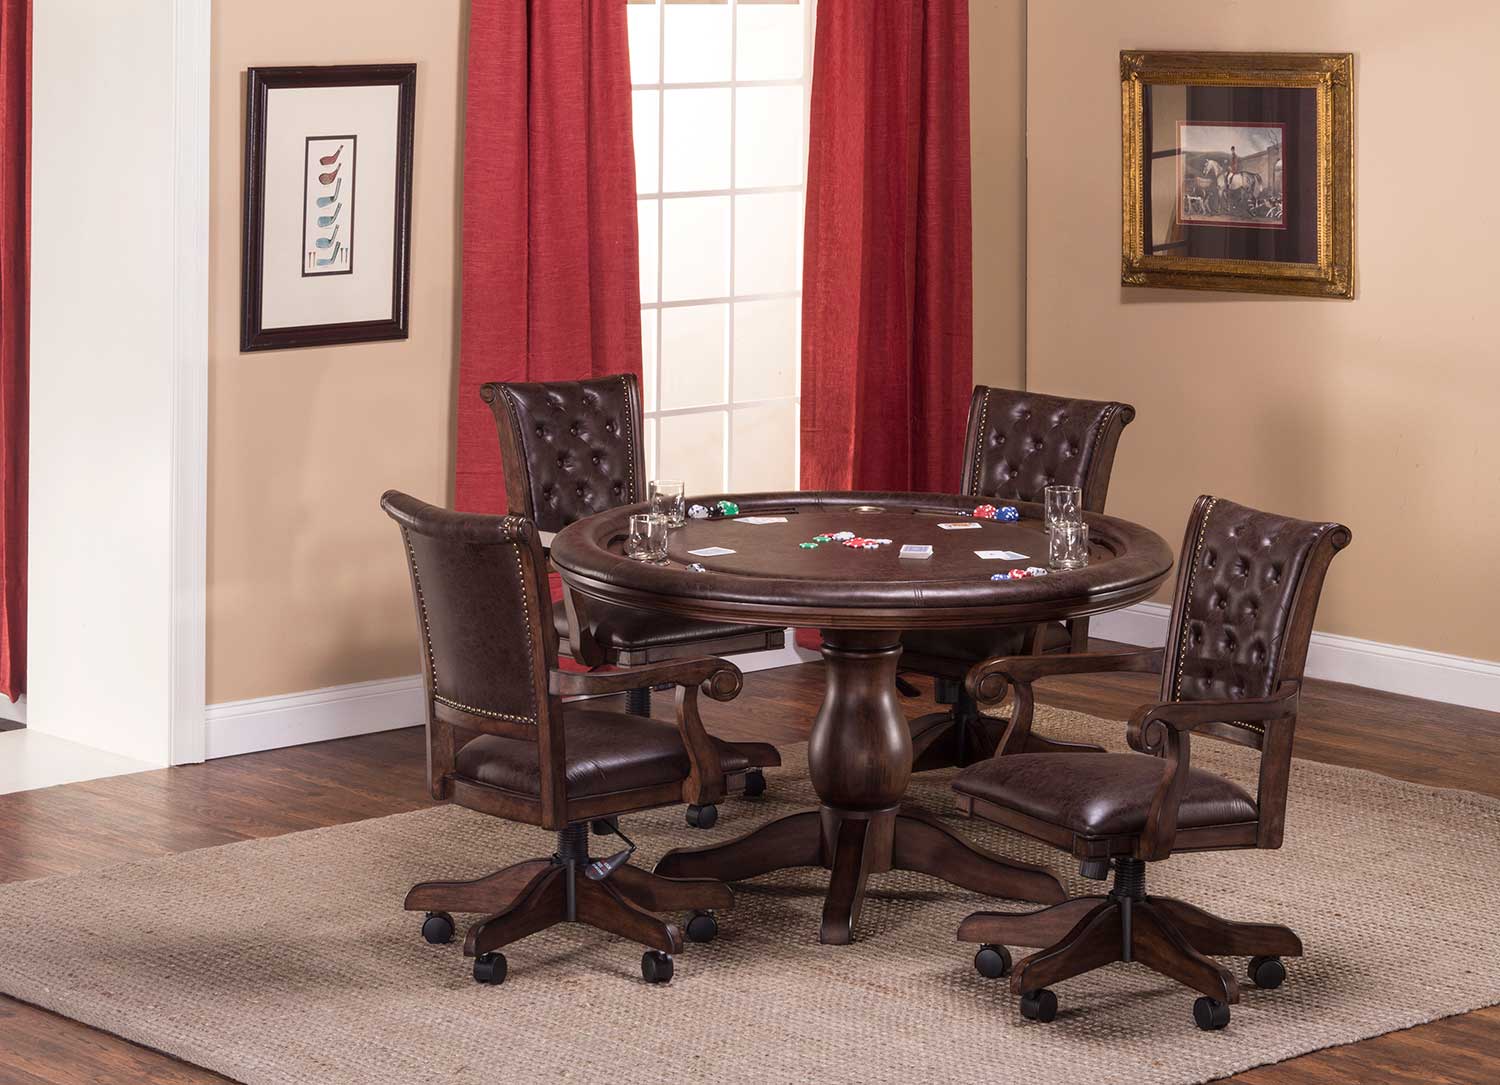 Hillsdale Chiswick 5-Piece Game Set - Brown Cherry